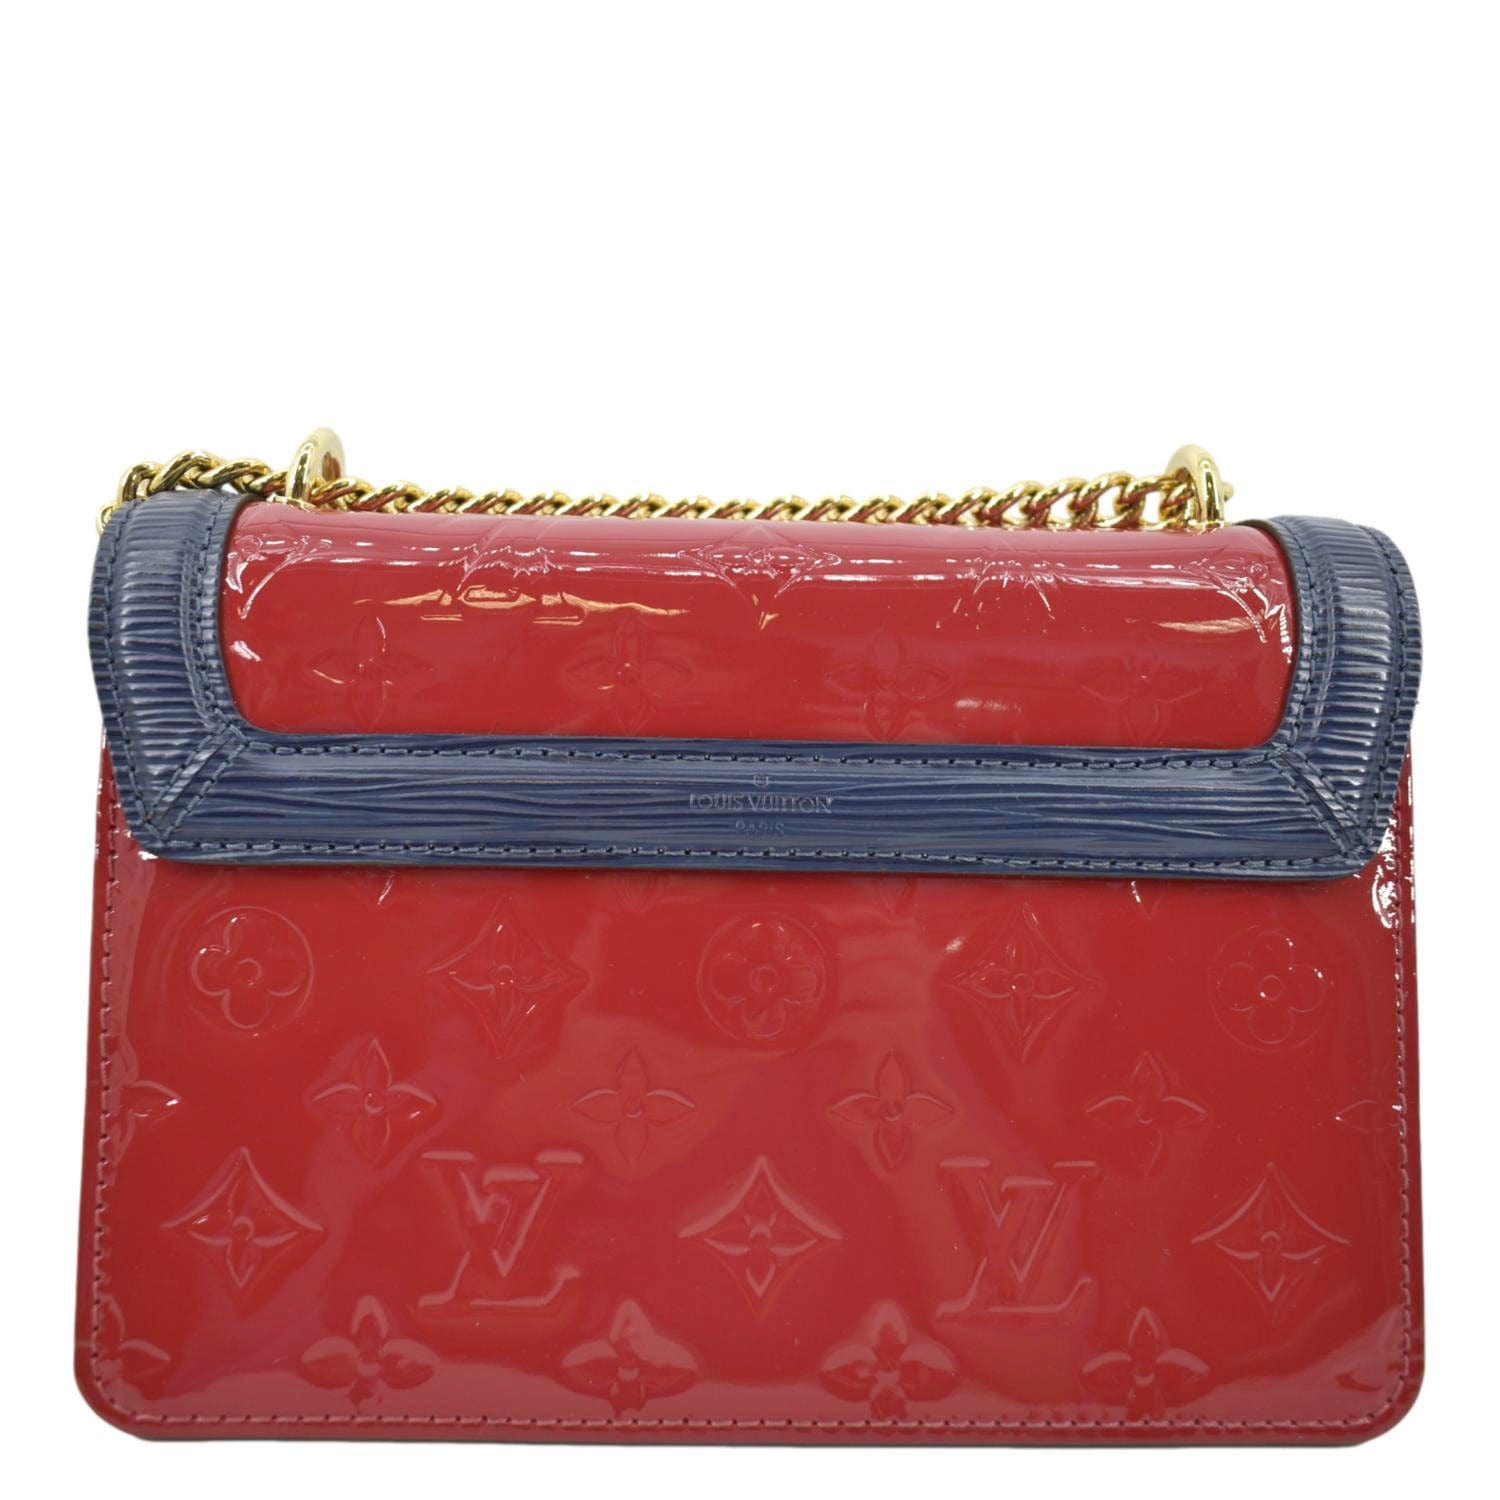 Lv wynwood leather crossbody bag Louis Vuitton Red in Leather - 31052794